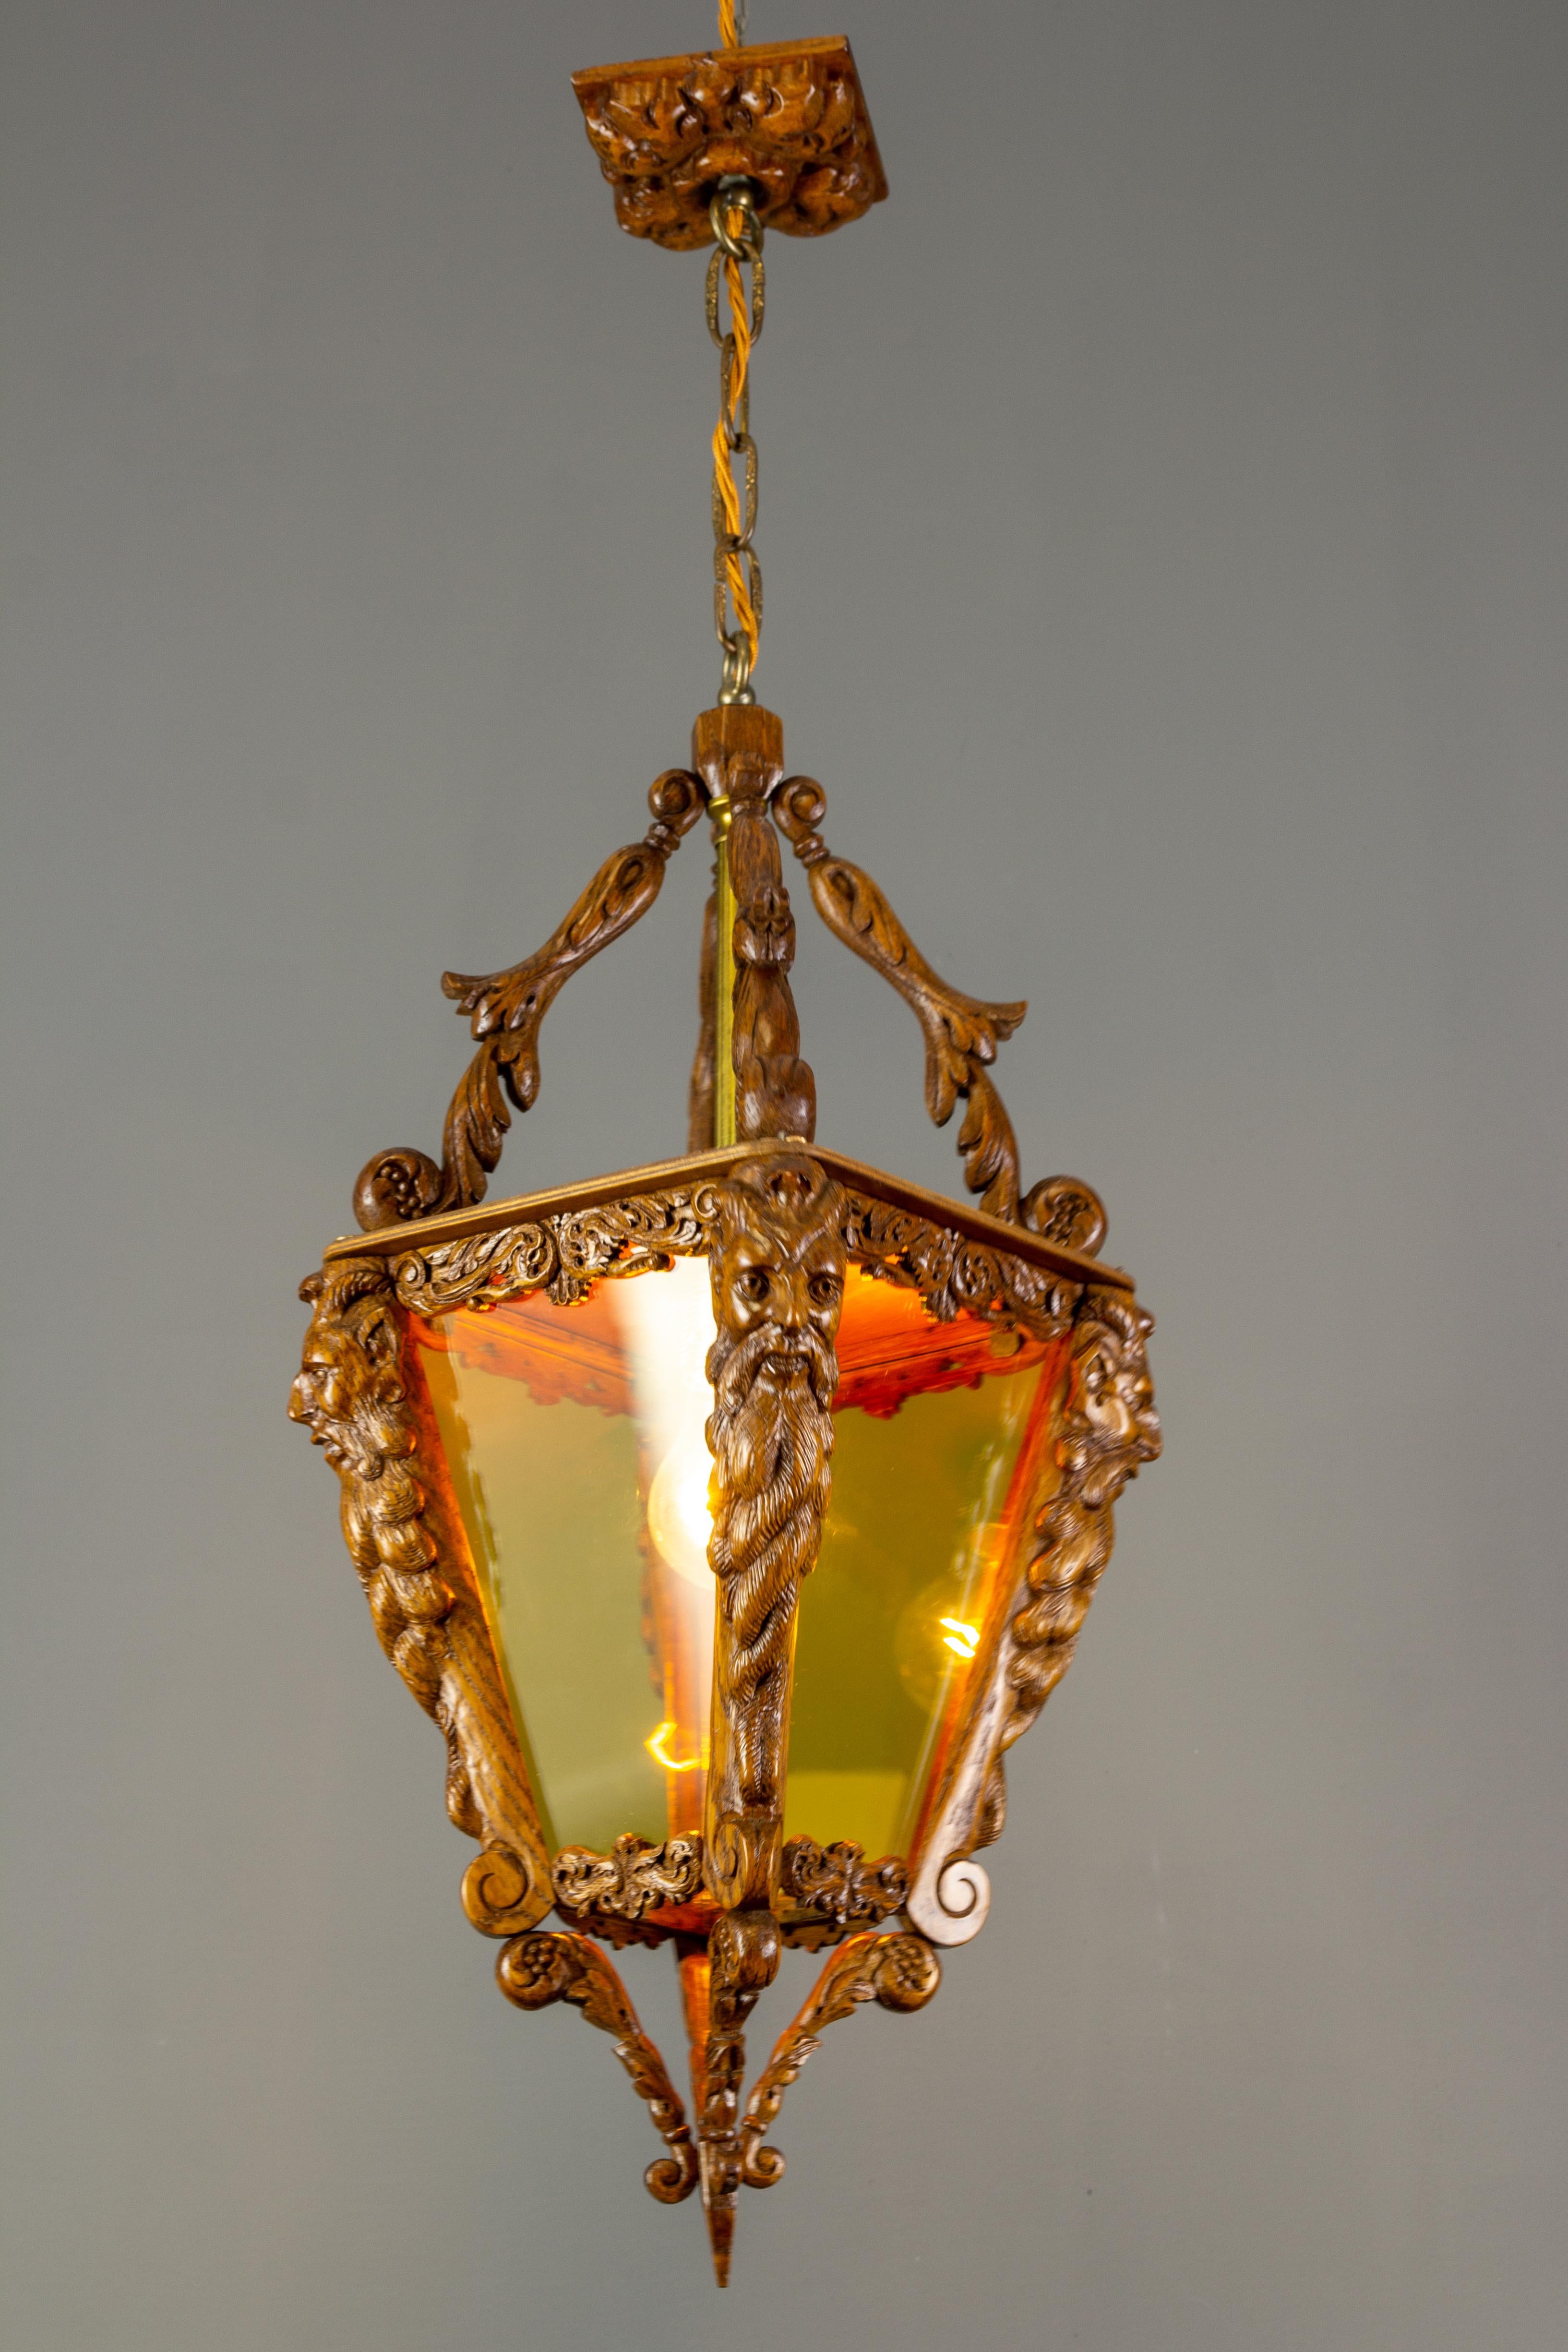 A beautiful and finely hand-carved wooden lantern with yellow glass, Belgium, circa the 1960s. Masterful carved wooden details such as acanthus leaves and four Bacchus heads on each corner of the lantern feature exceptional carving workmanship. Even